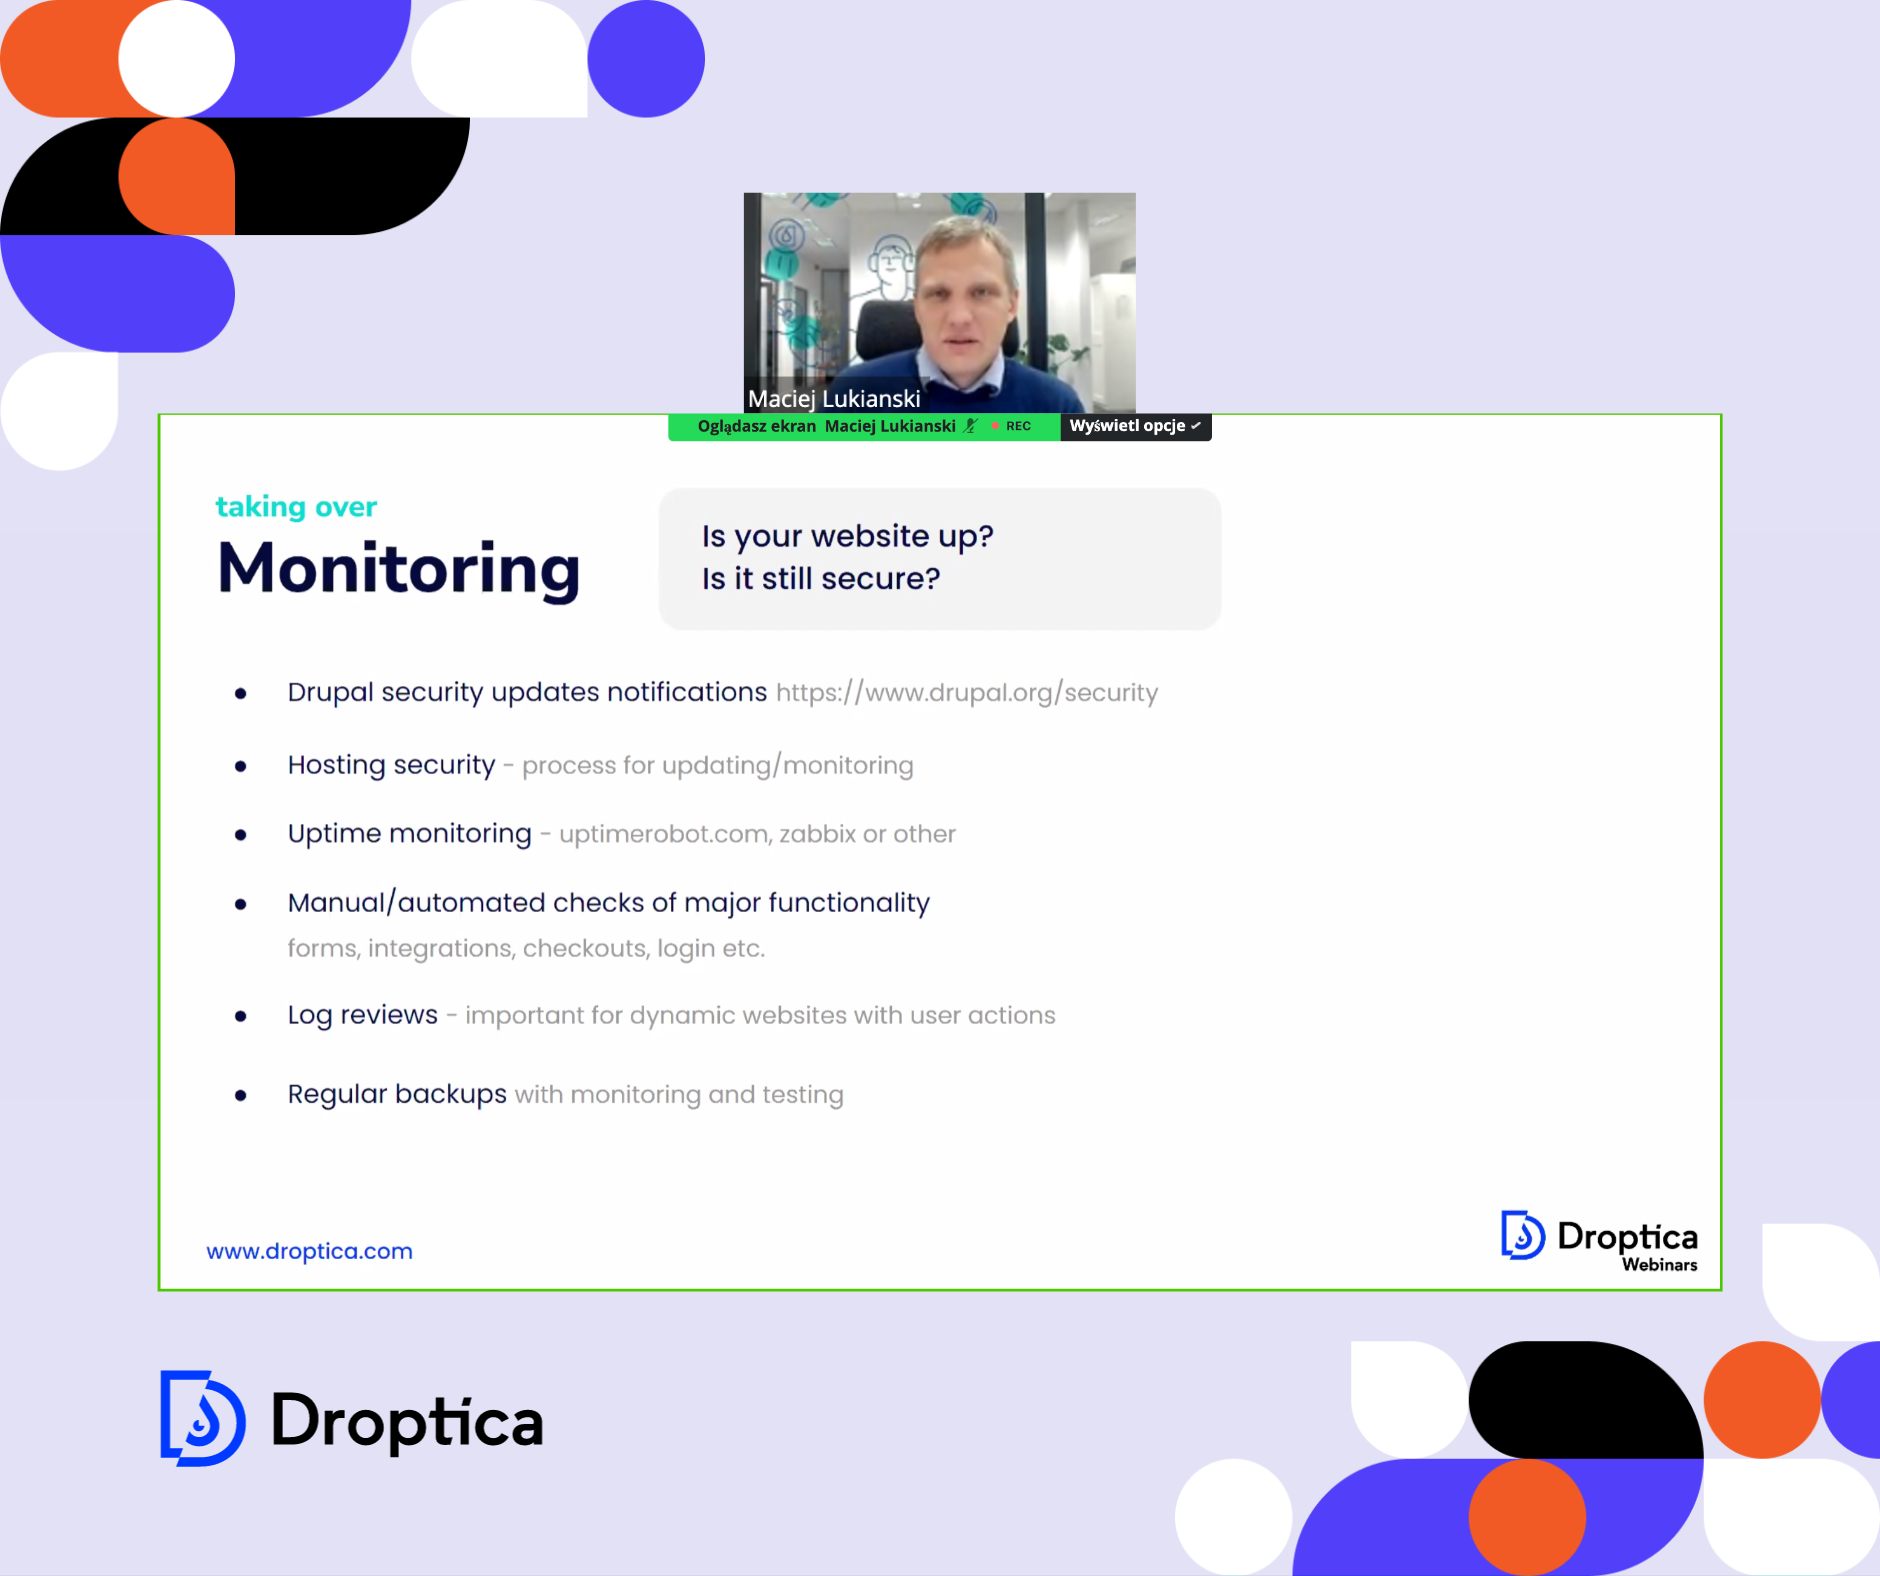 Droptica Webinars are live streams on Drupal support, held periodically and online in 2023.